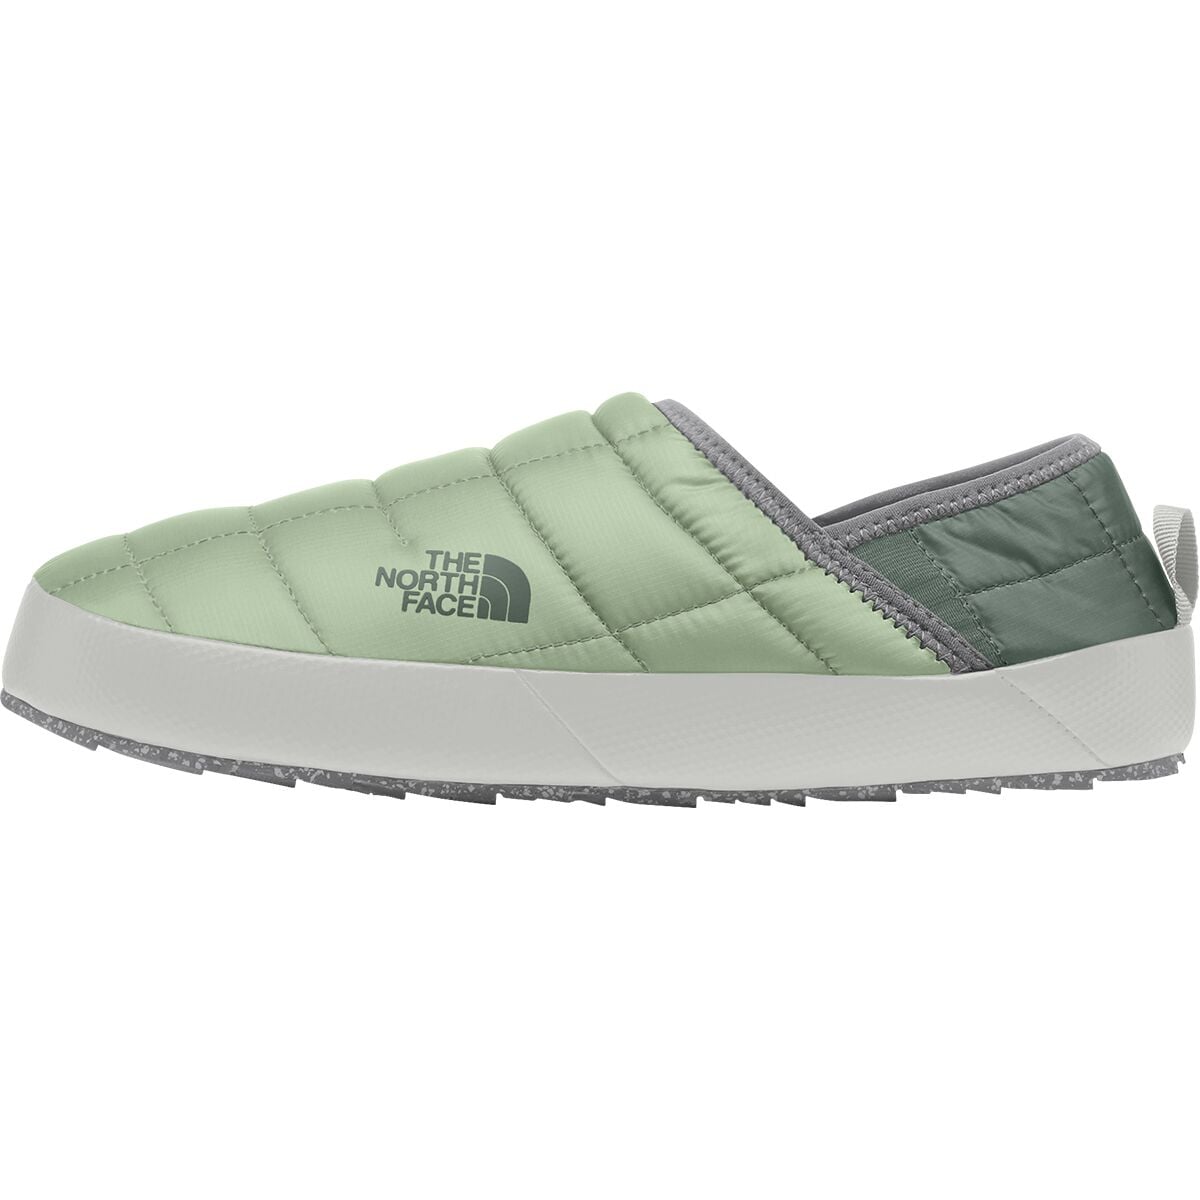 The North Face Thermoball Traction Mule V Shoe - Women's